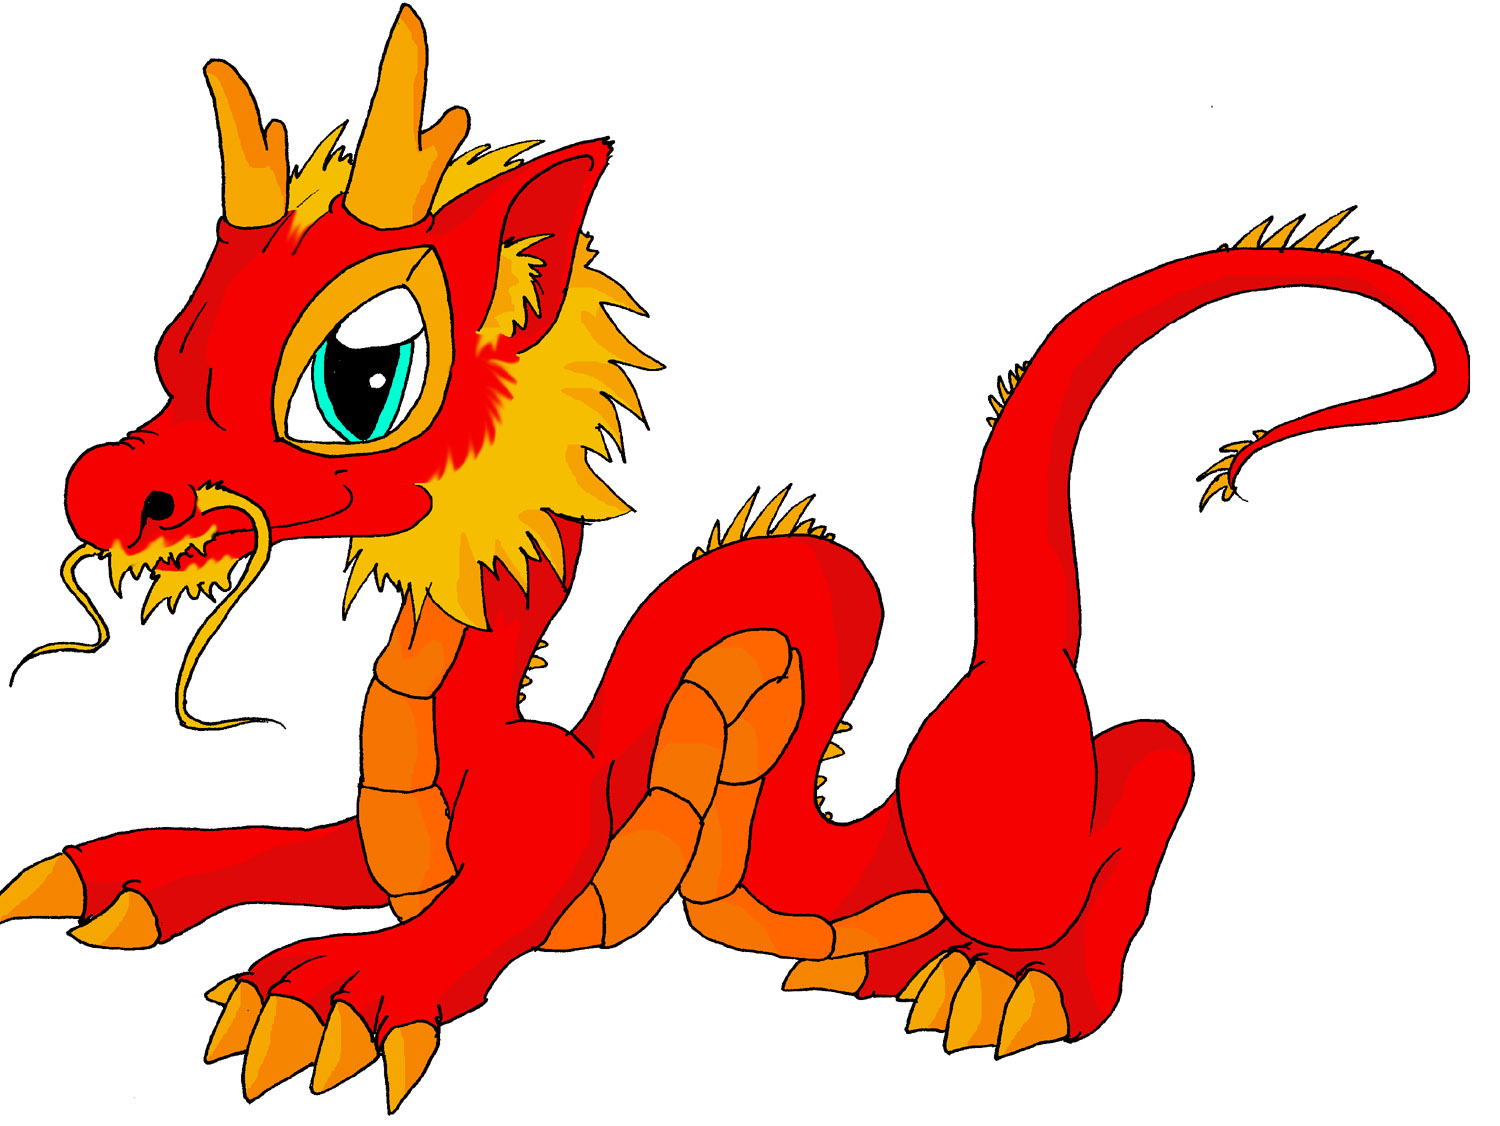 Chinese Dragon by Chickibo